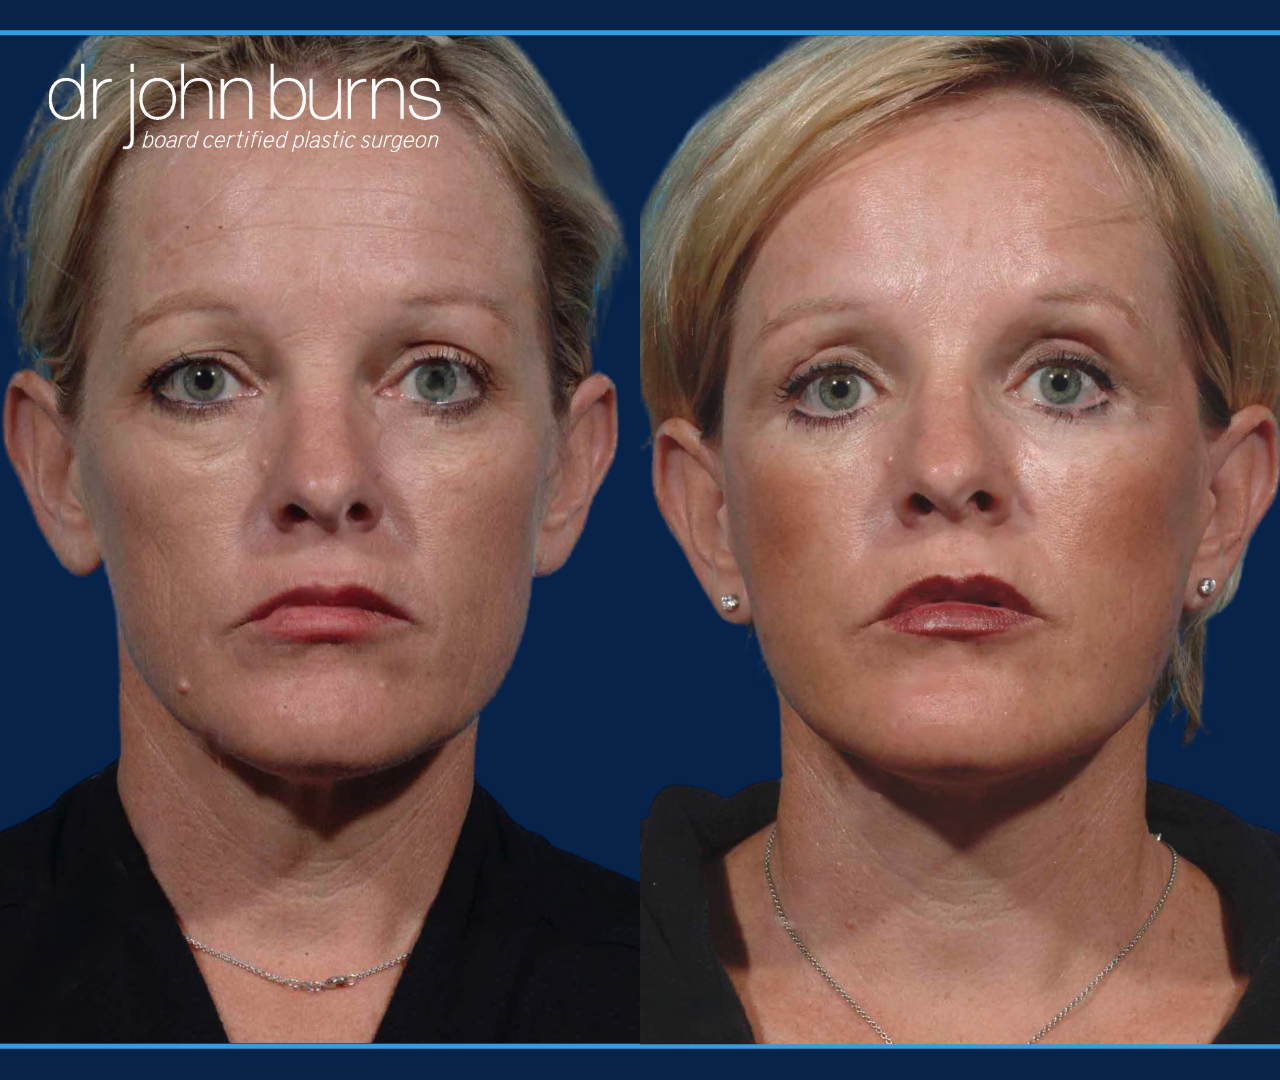 Before and After Dallas Mini Facelift Results by Dr. John Burns